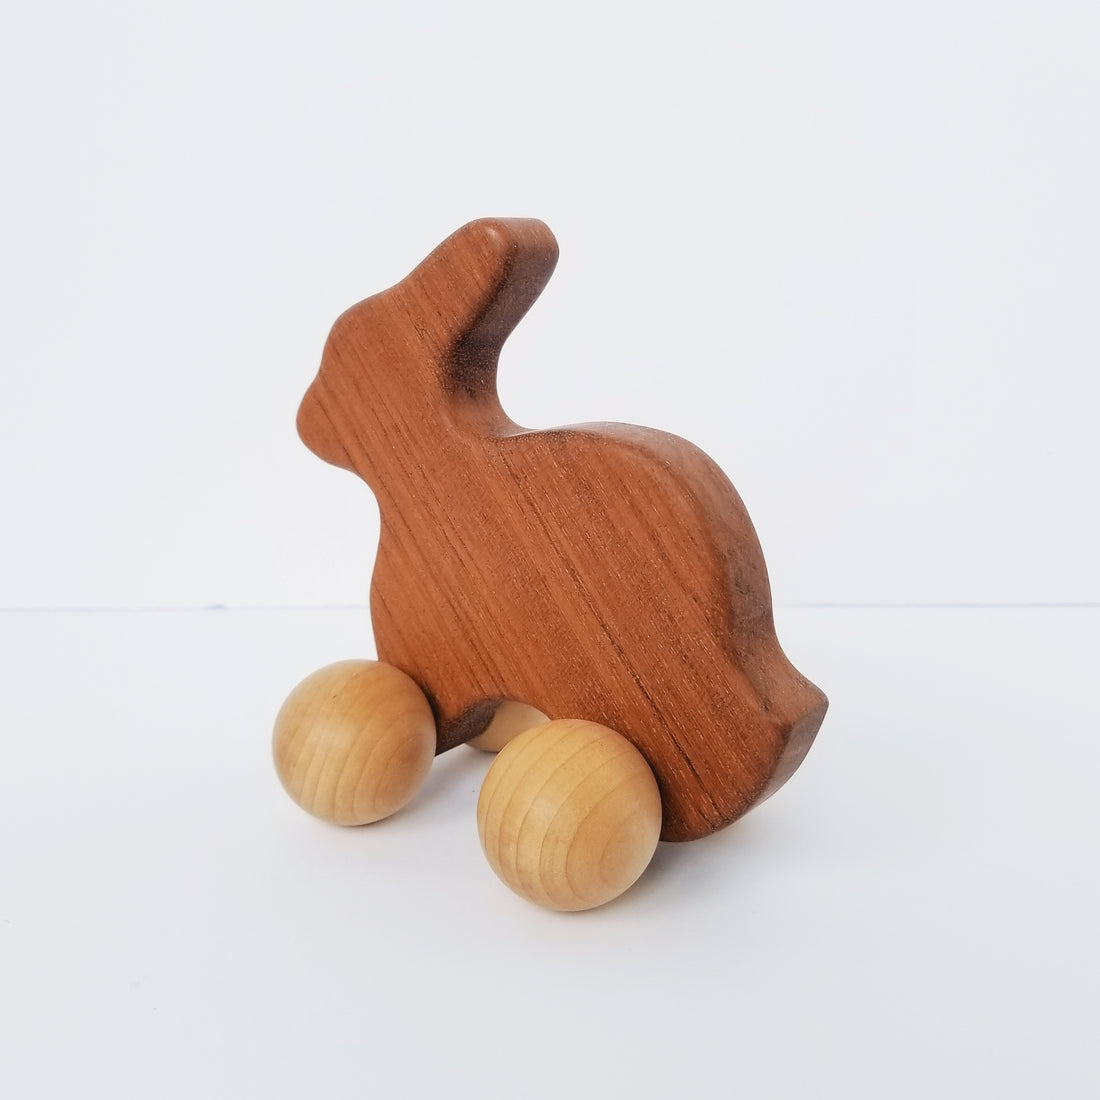 Dark wood rabbit toy with ball wheels on a white background